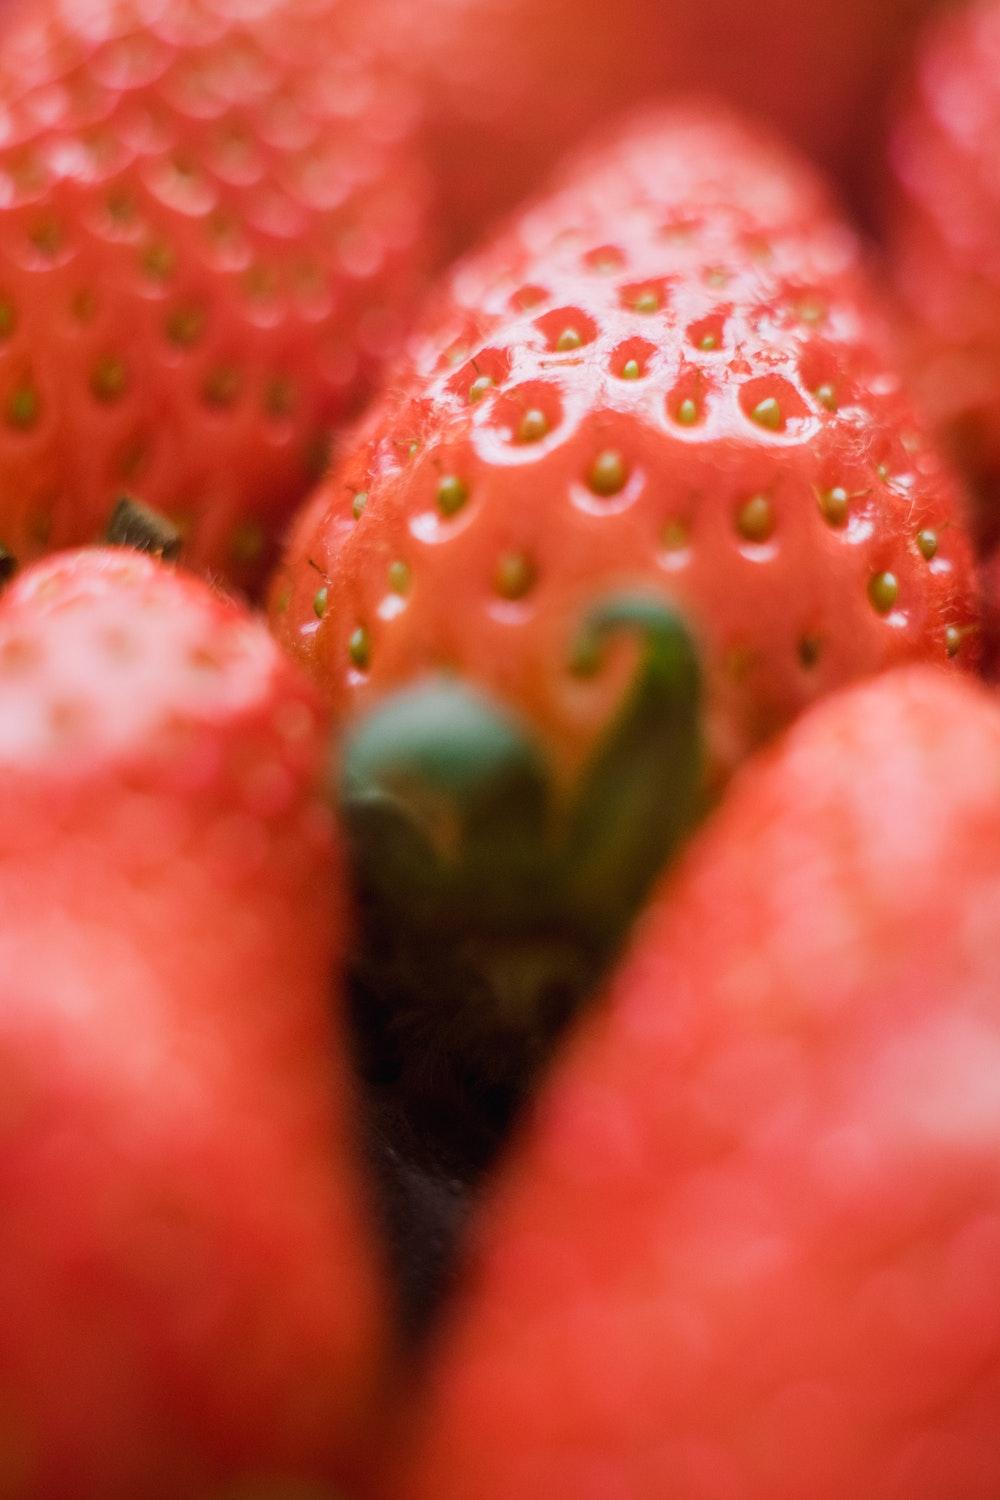 Strawberry Picture. Download Free Image